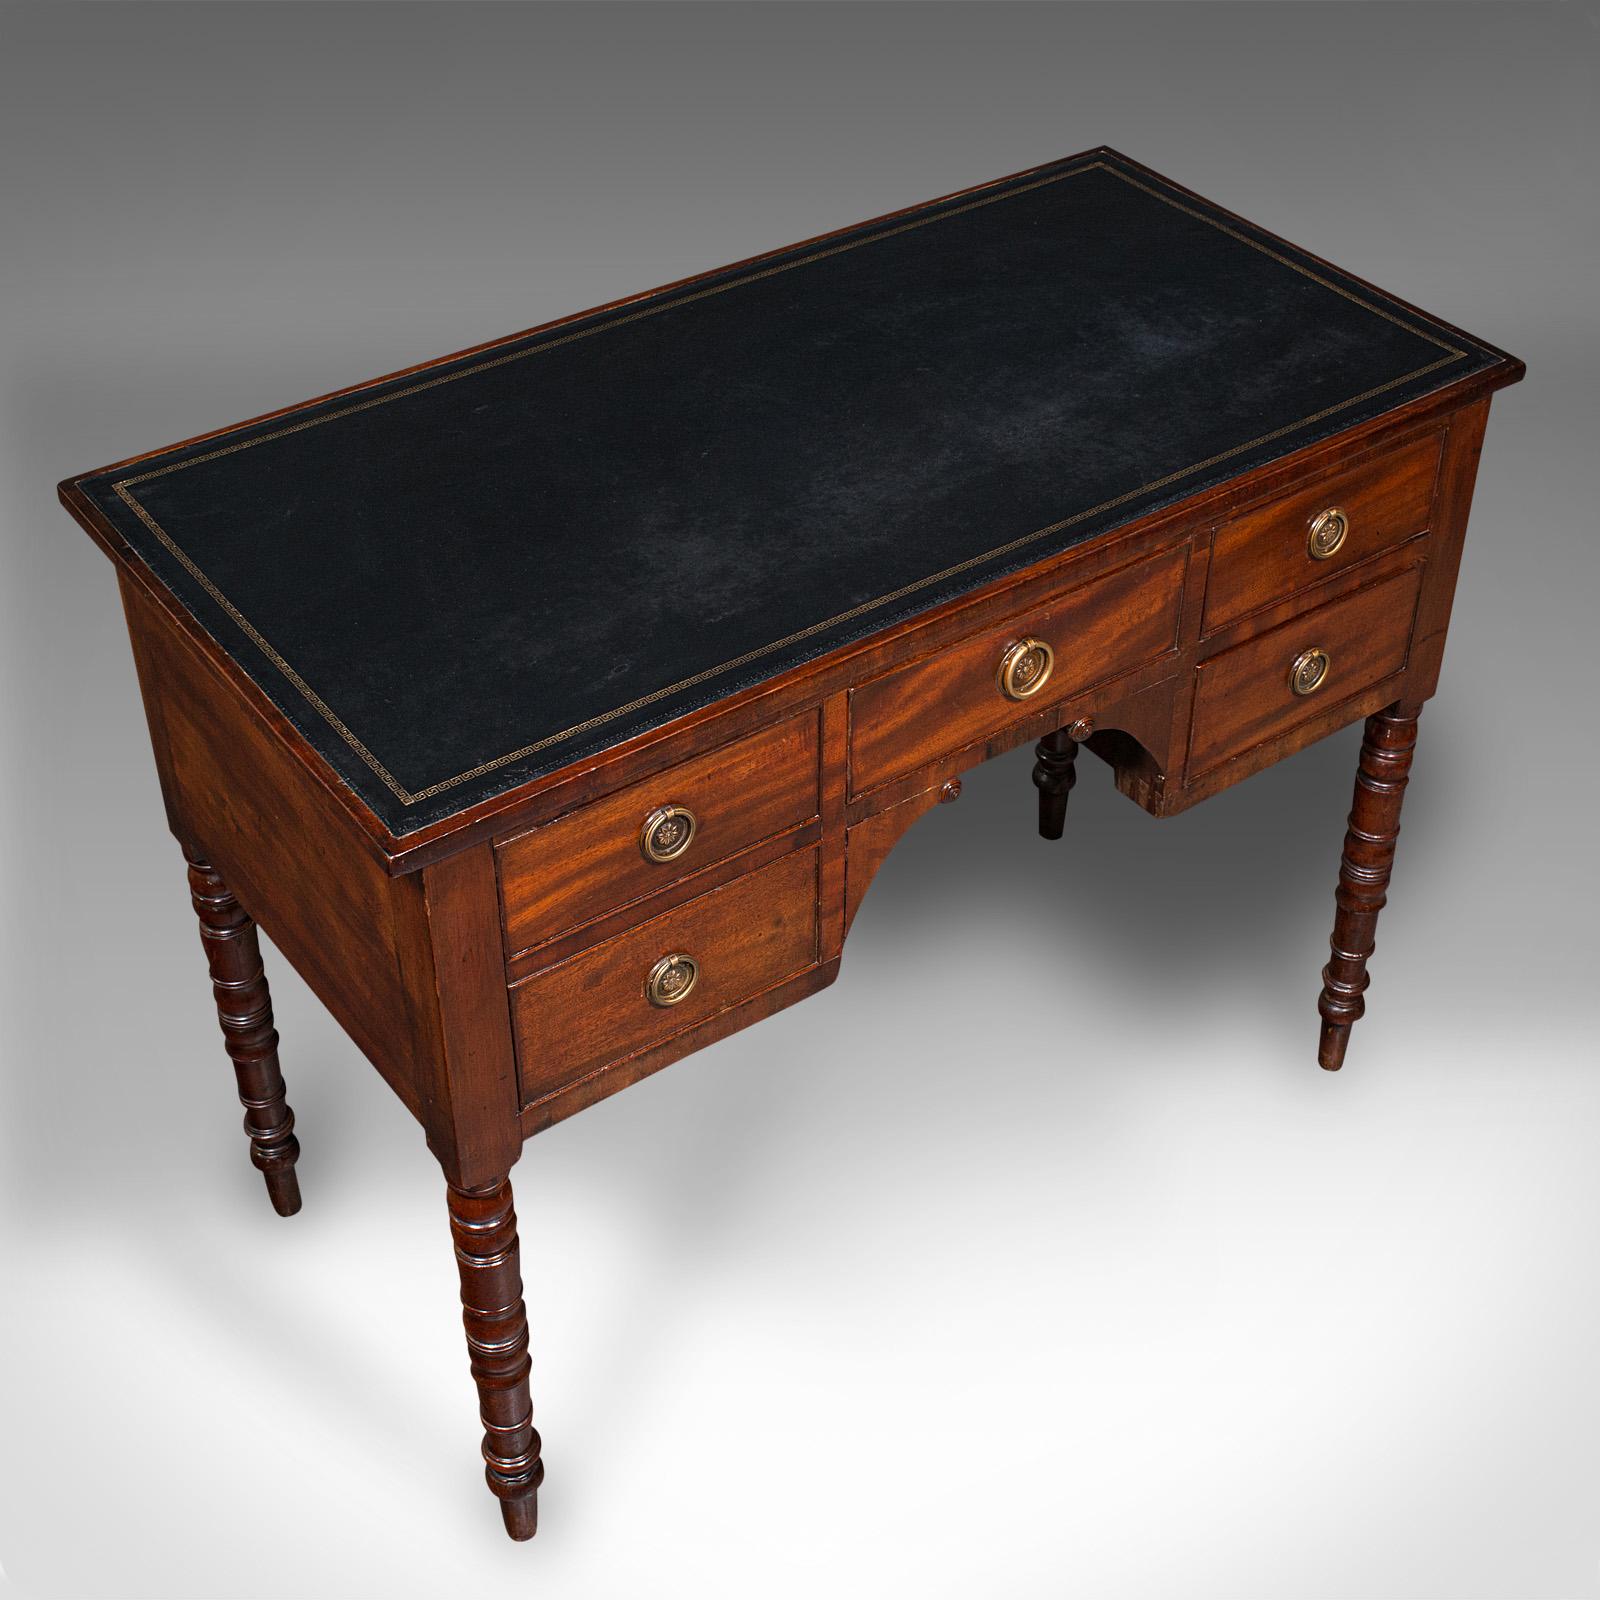 Wood Antique Ladies Writing Desk, English, Correspondence Table, Victorian, C.1850 For Sale